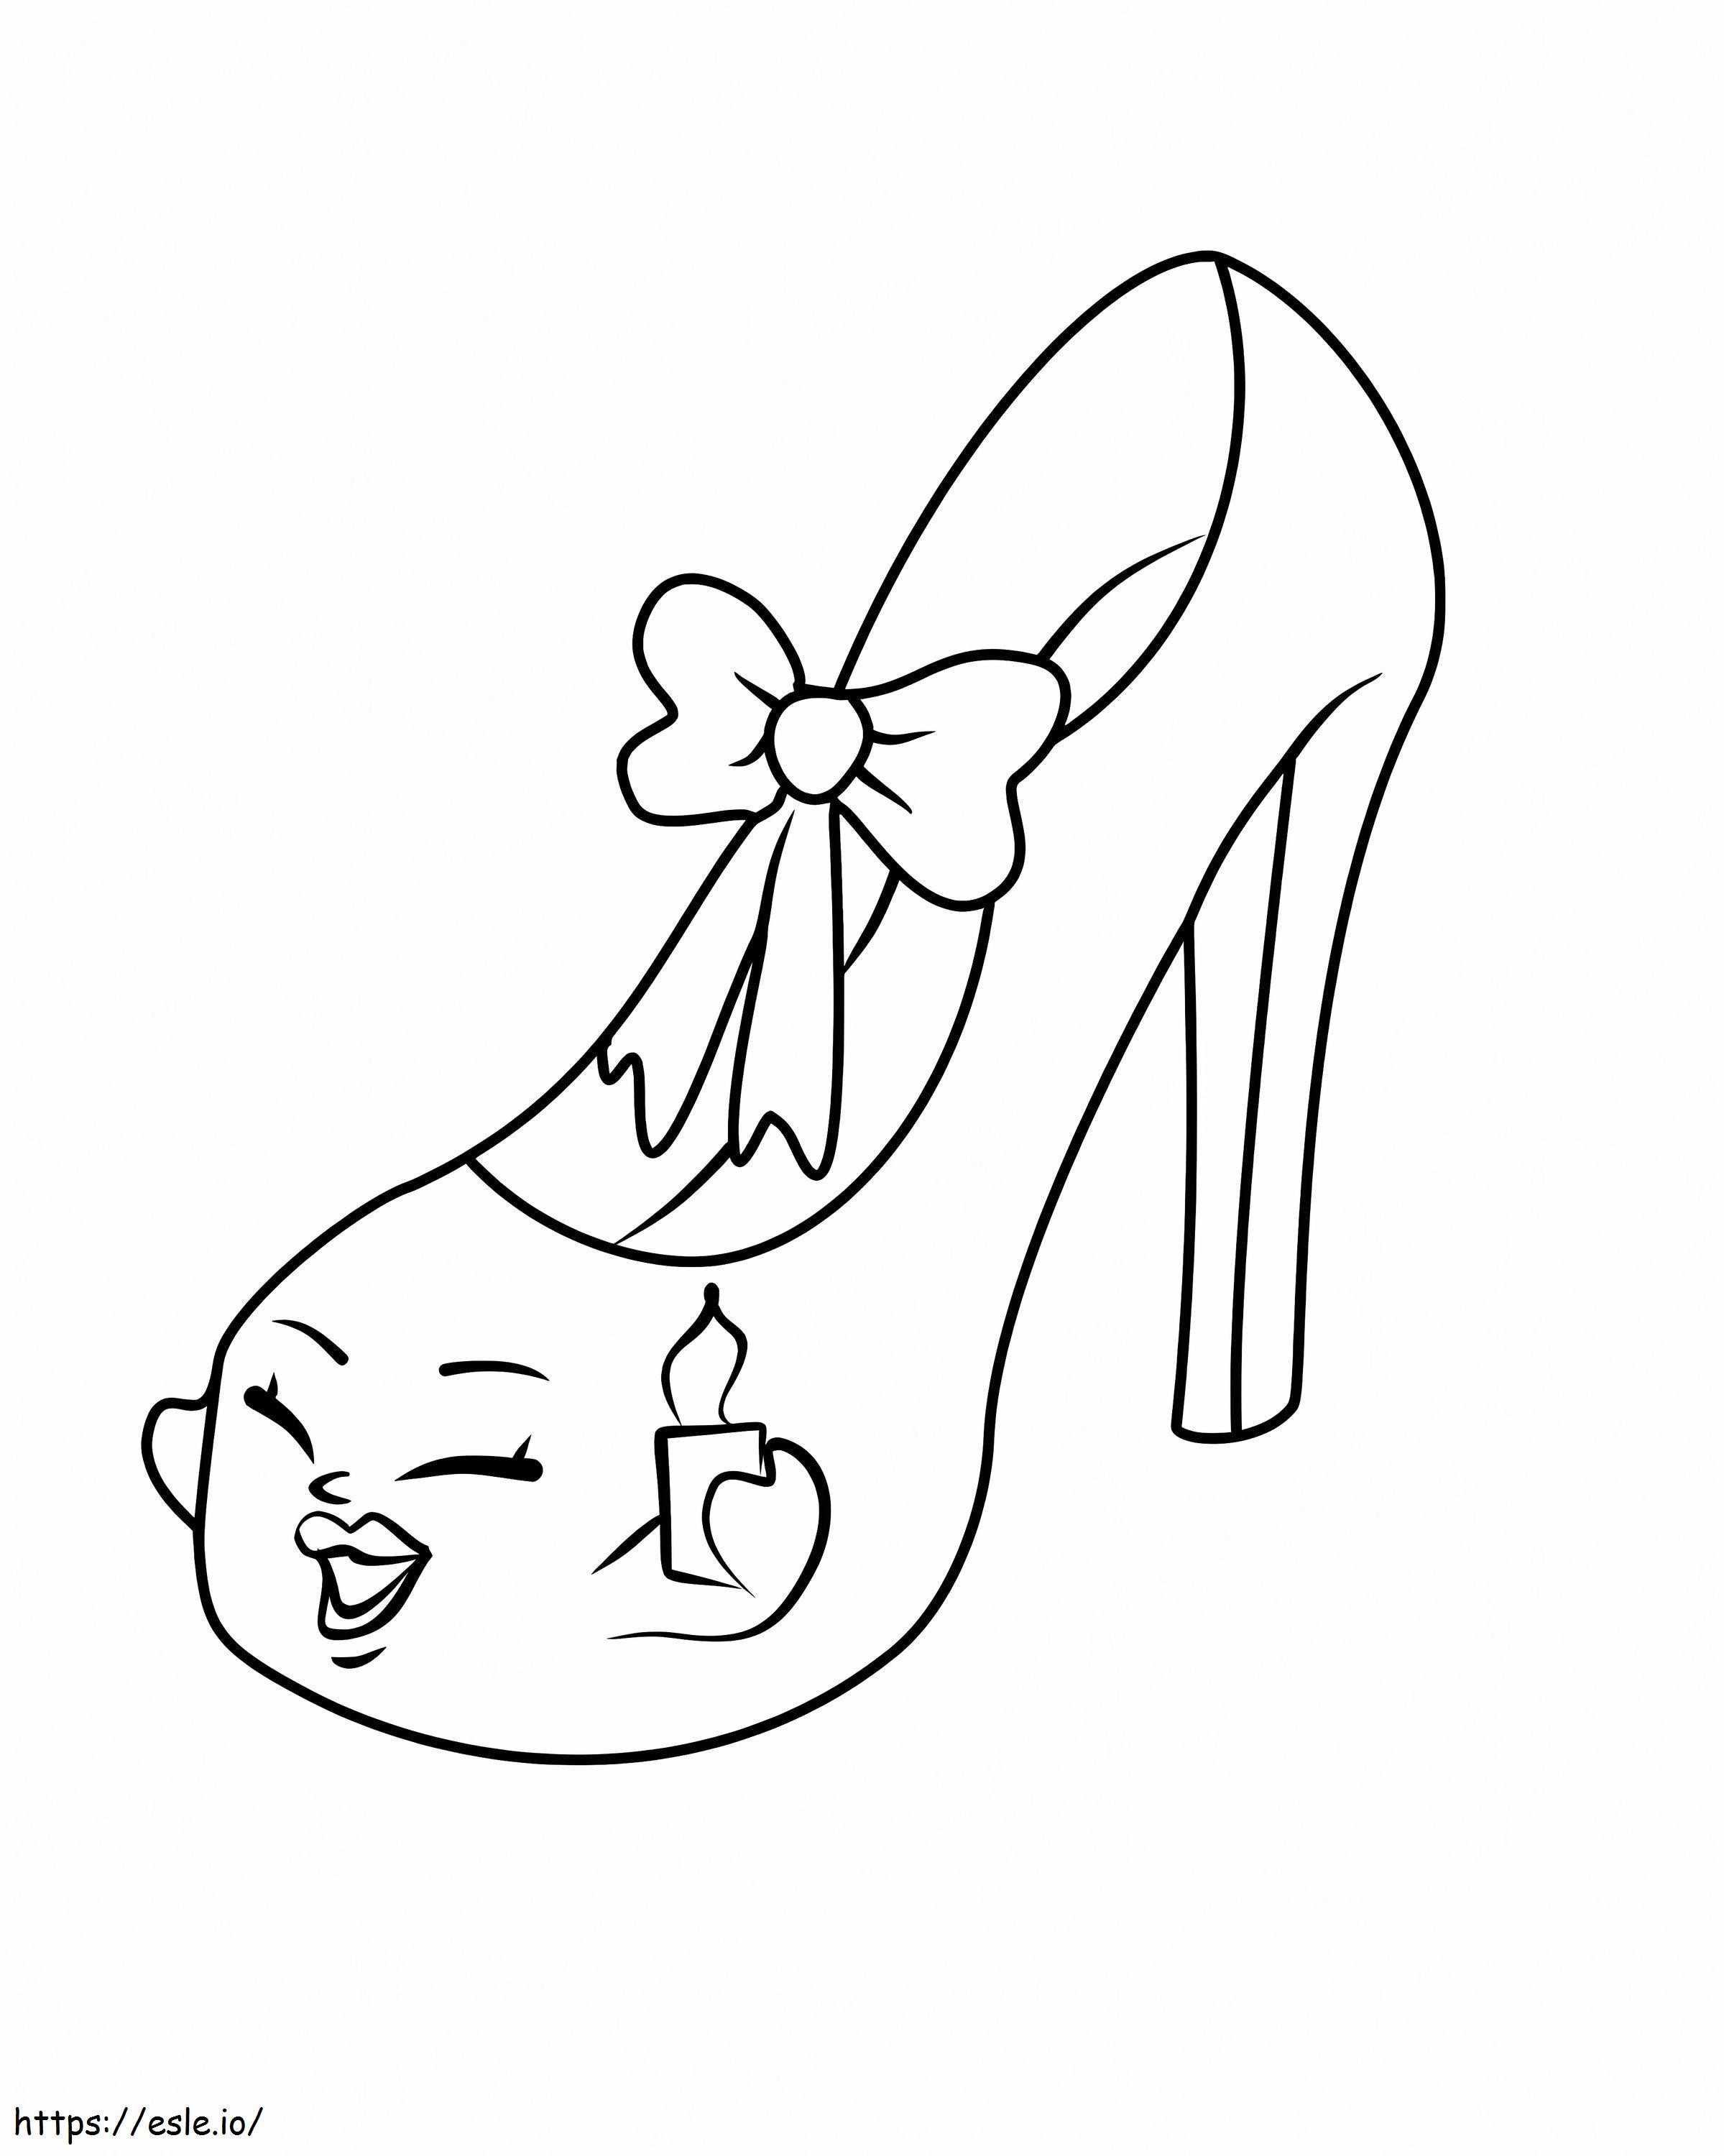 Cartoon High Heel Shoes coloring page